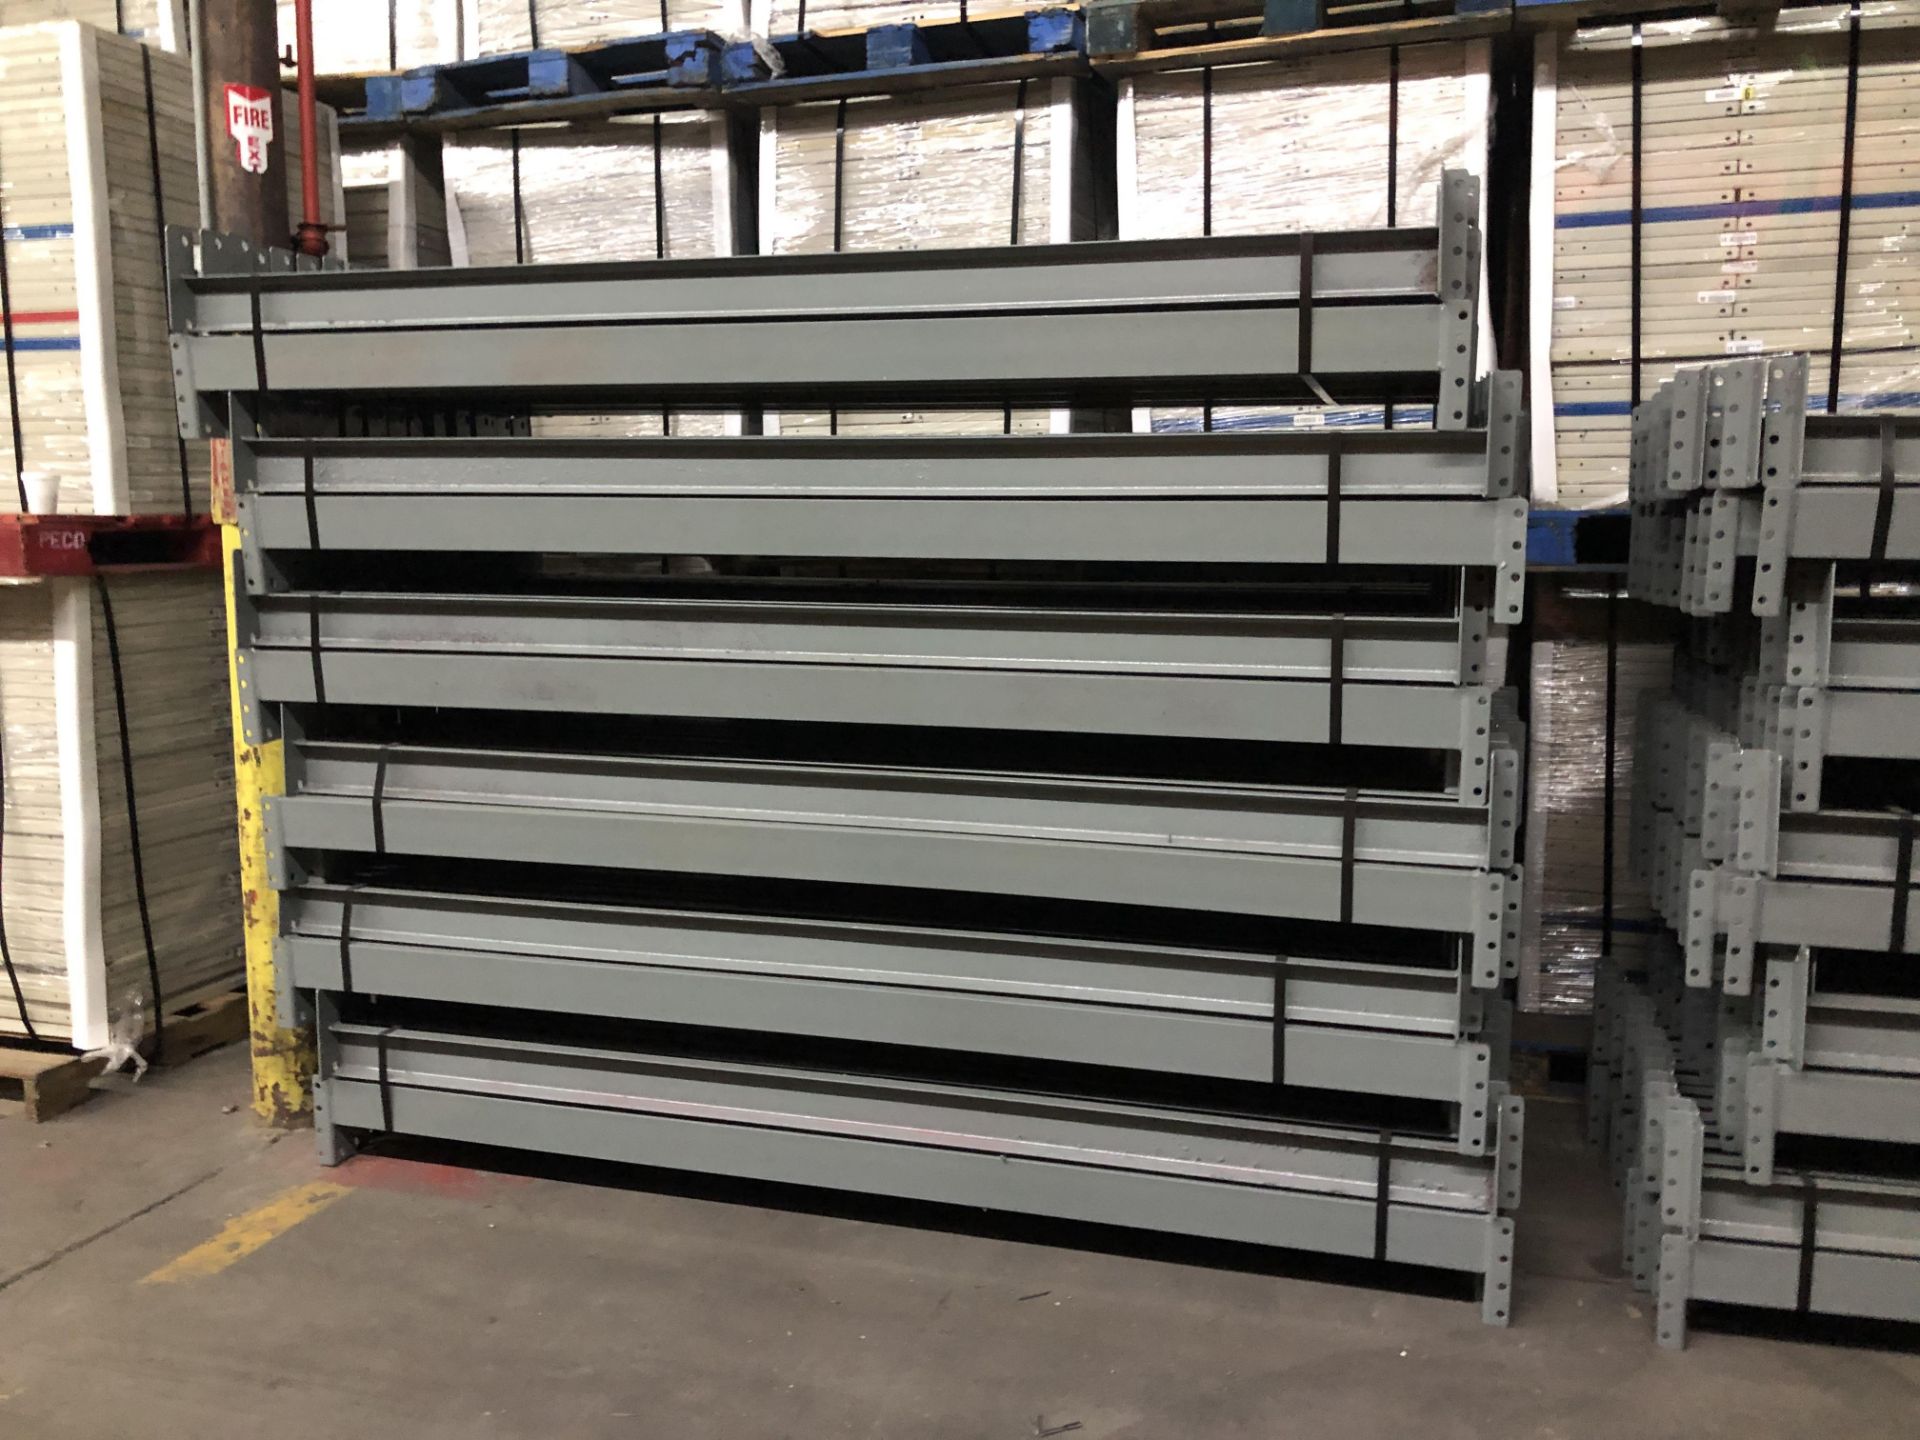 9 BAYS OF 10.5'H X 42"D X 93"L STRUCTURAL STYLE PALLET RACKS - Image 4 of 6